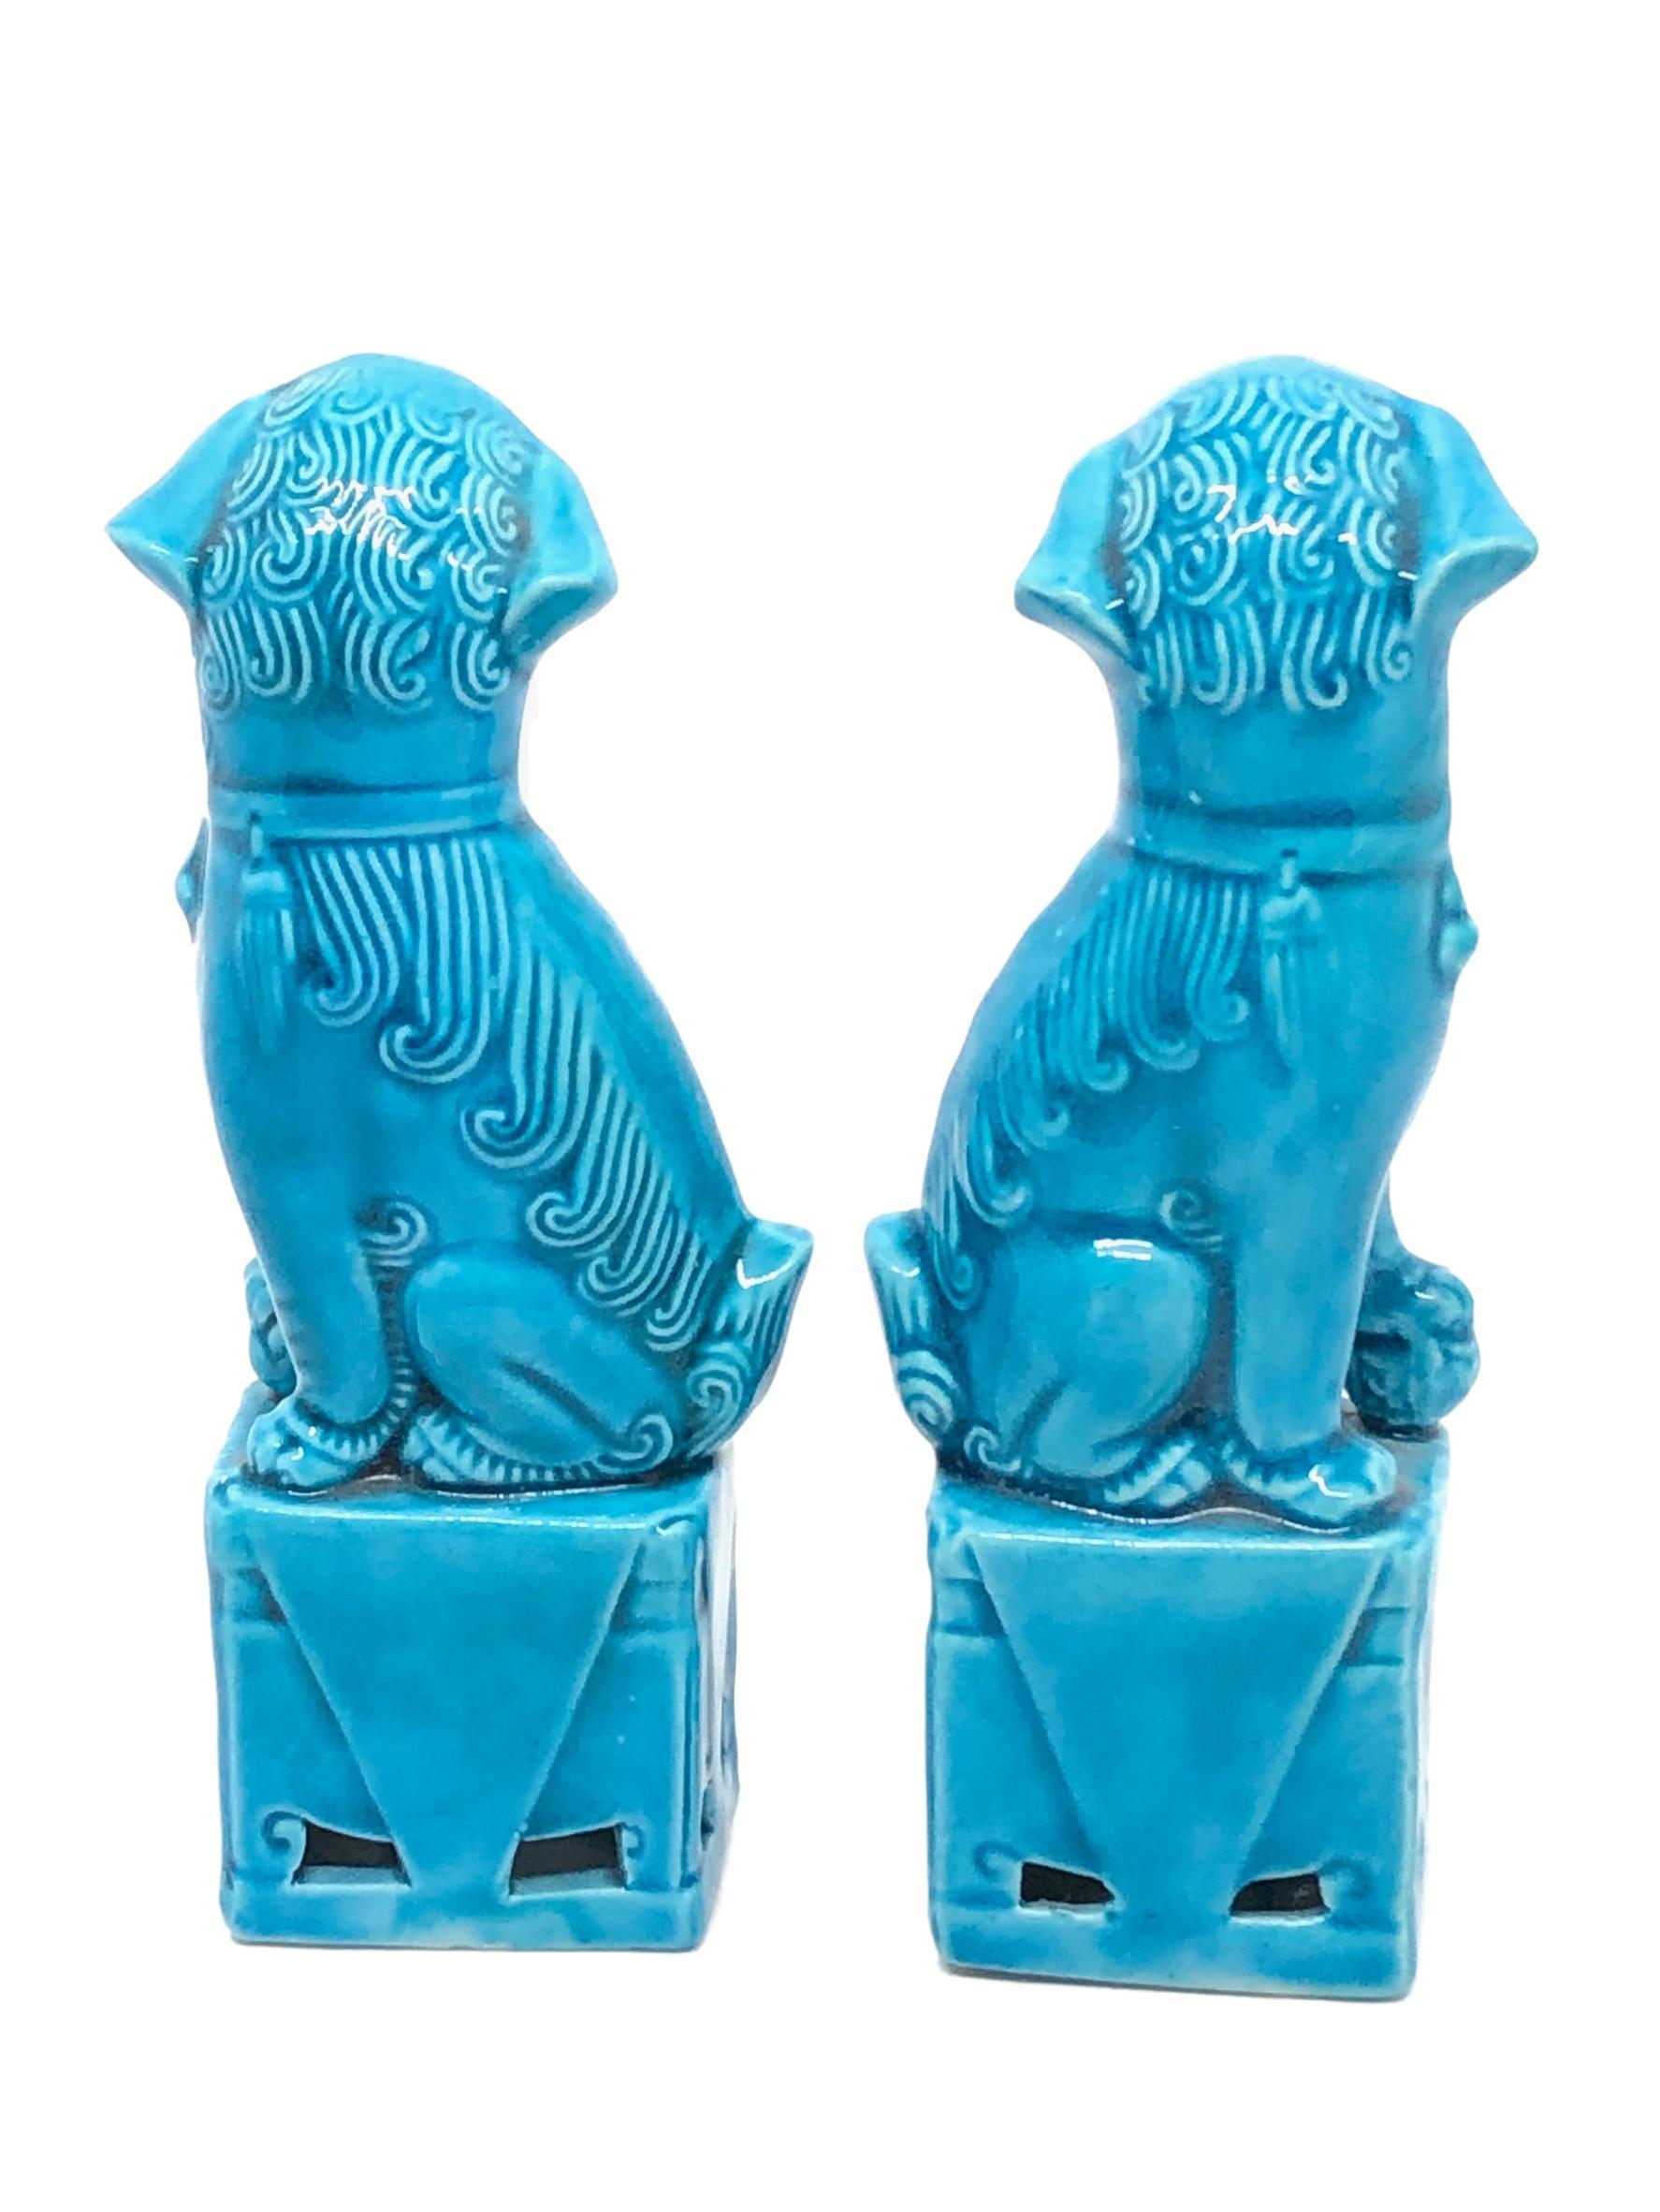 Hollywood Regency Pair of Decorative Turquoise Blue Mini Foo Dogs Sculptures